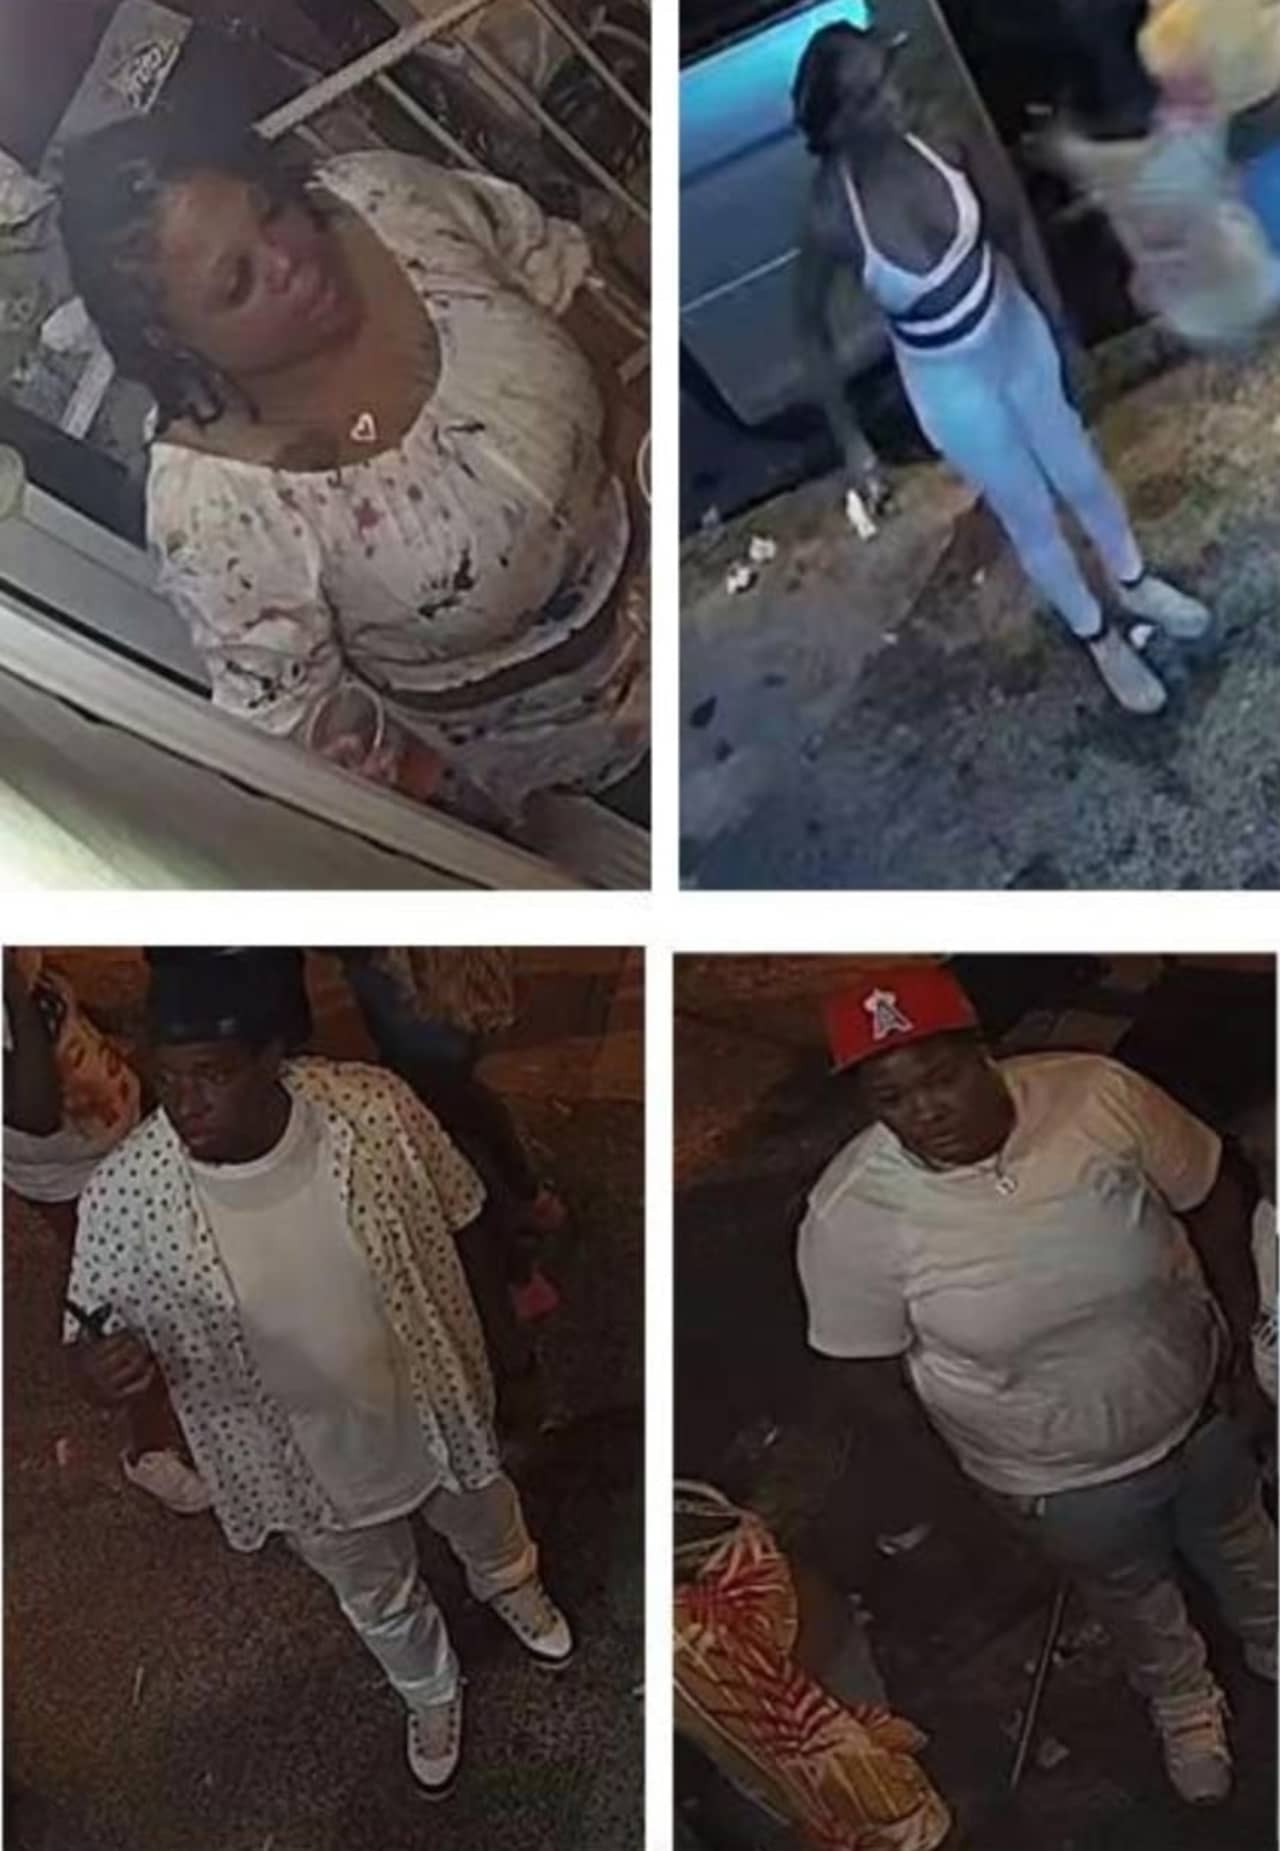 Authorities are seeking the public’s help identifying suspects involved in a shooting in Newark earlier this month.